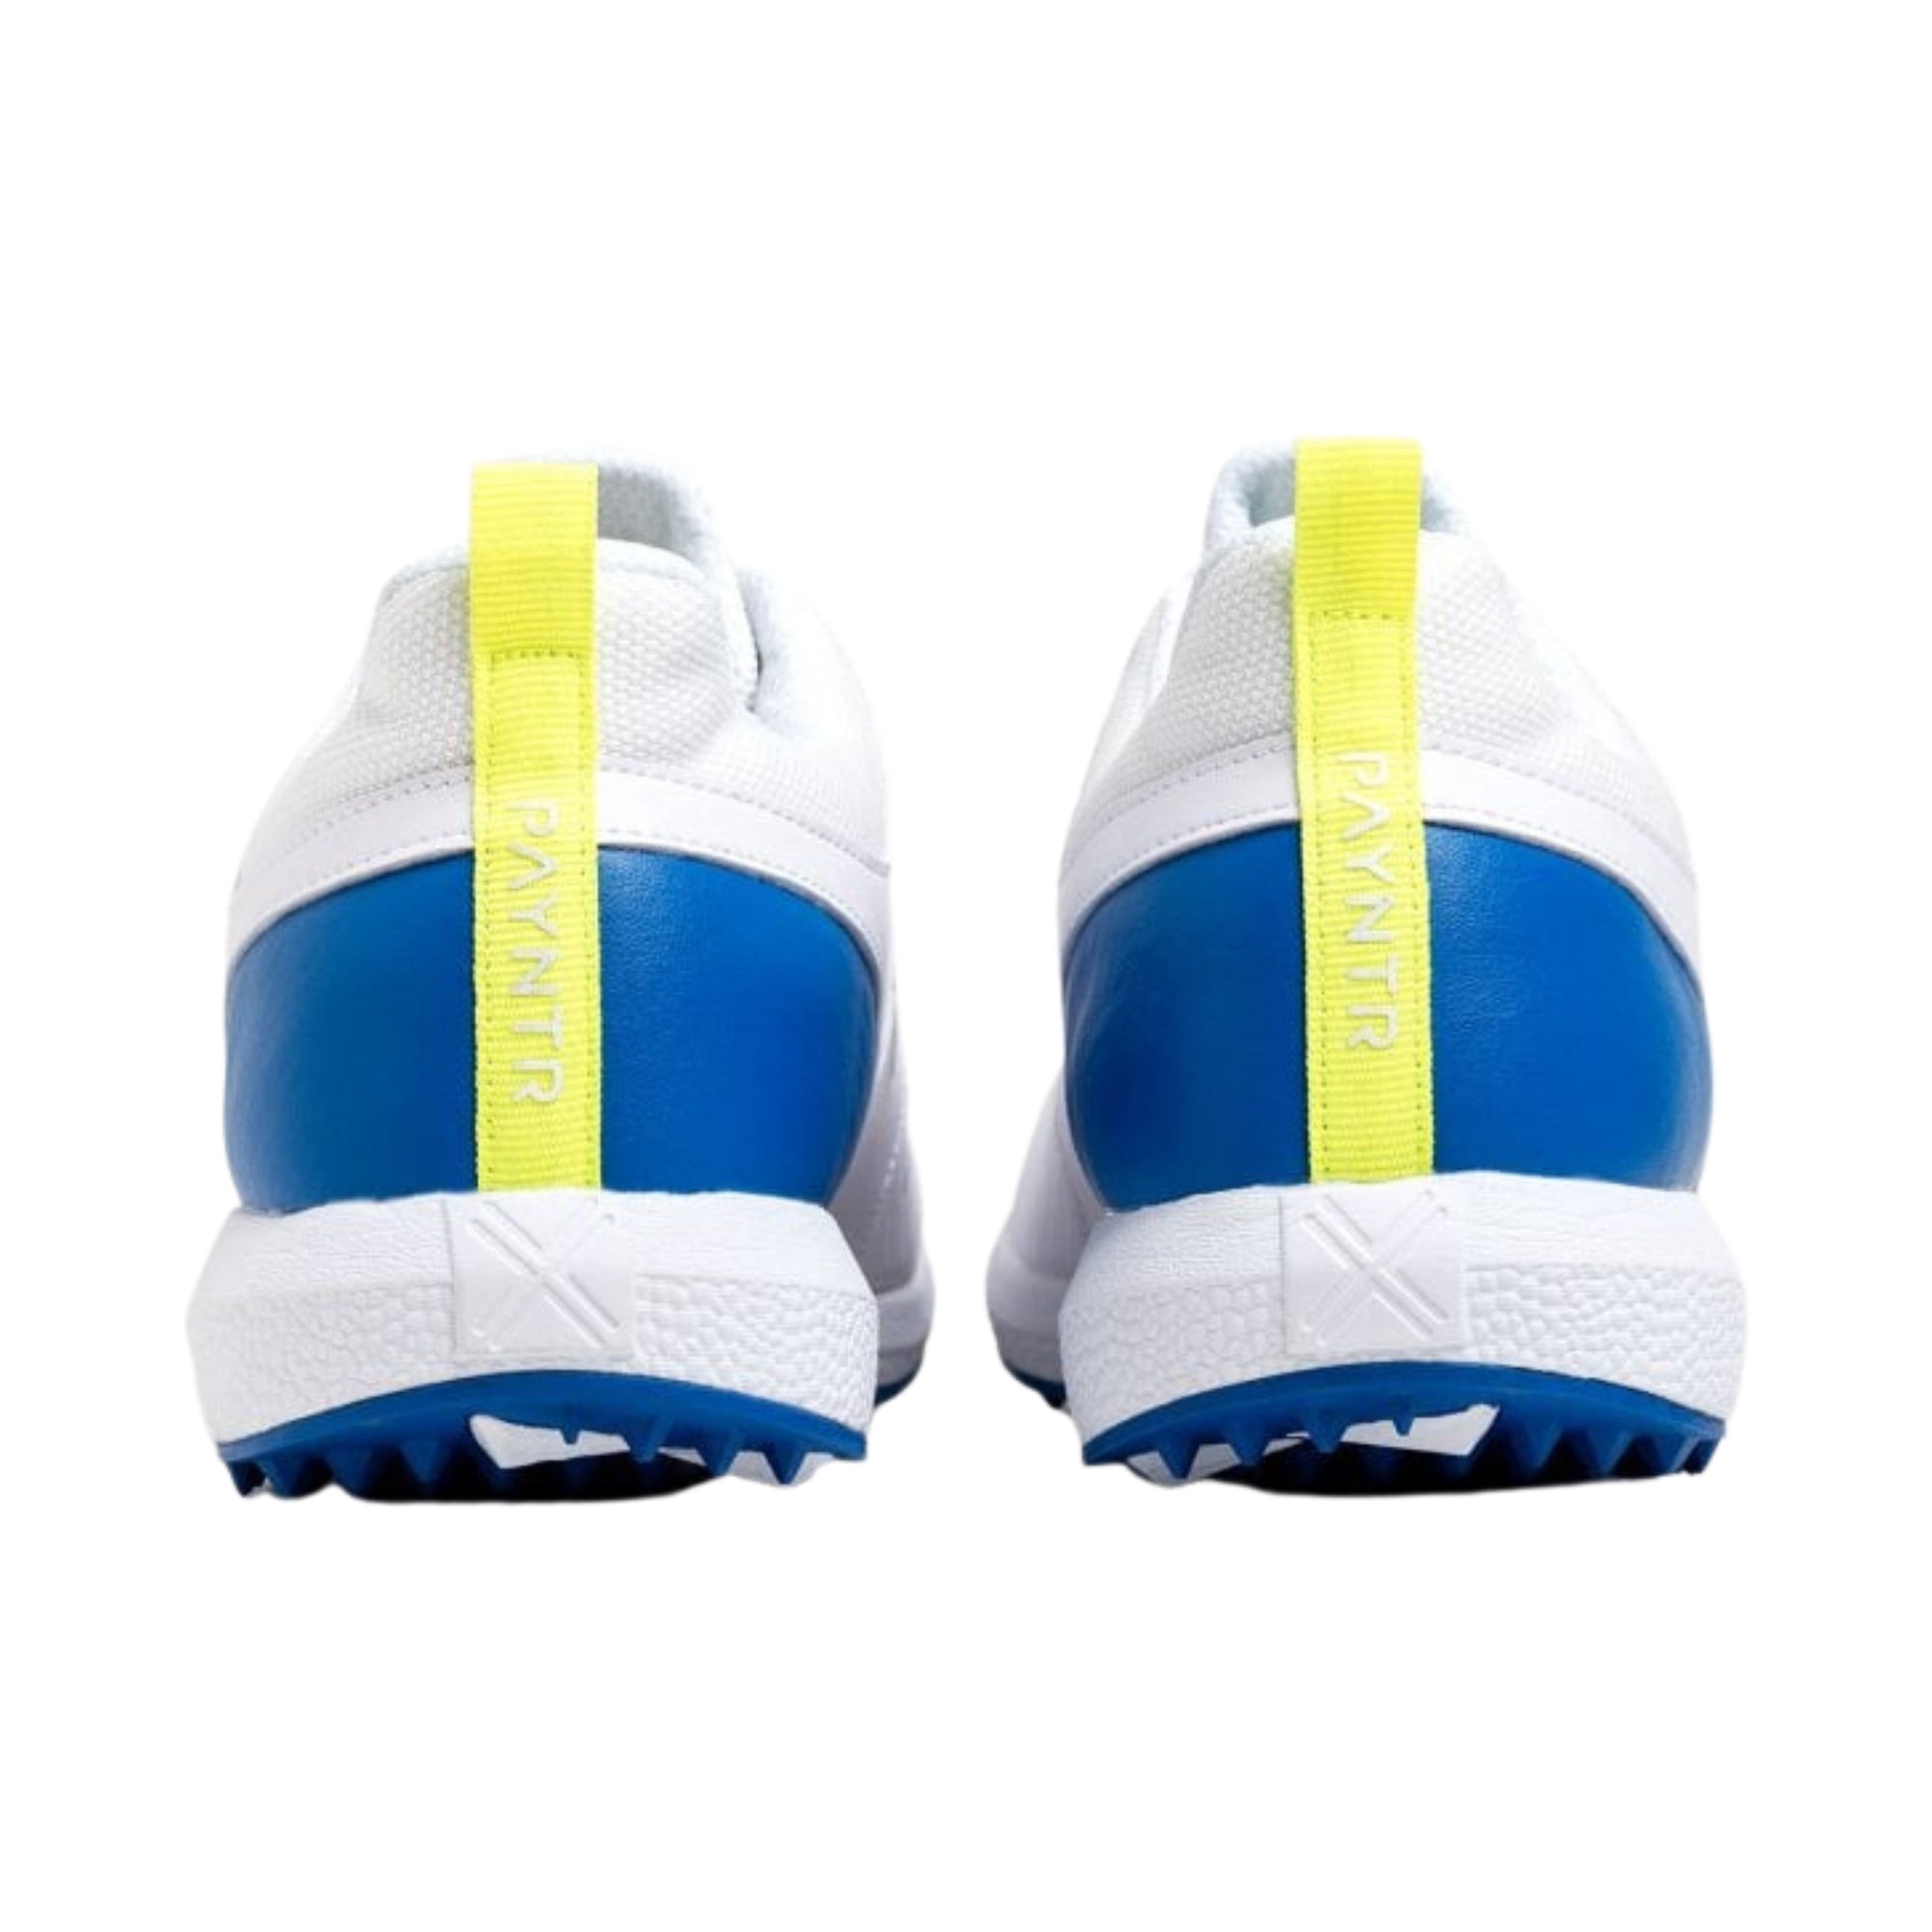 Payntr Cricket Shoes, Model V Pimple - White/Blue All Rounder Cricket Shoes